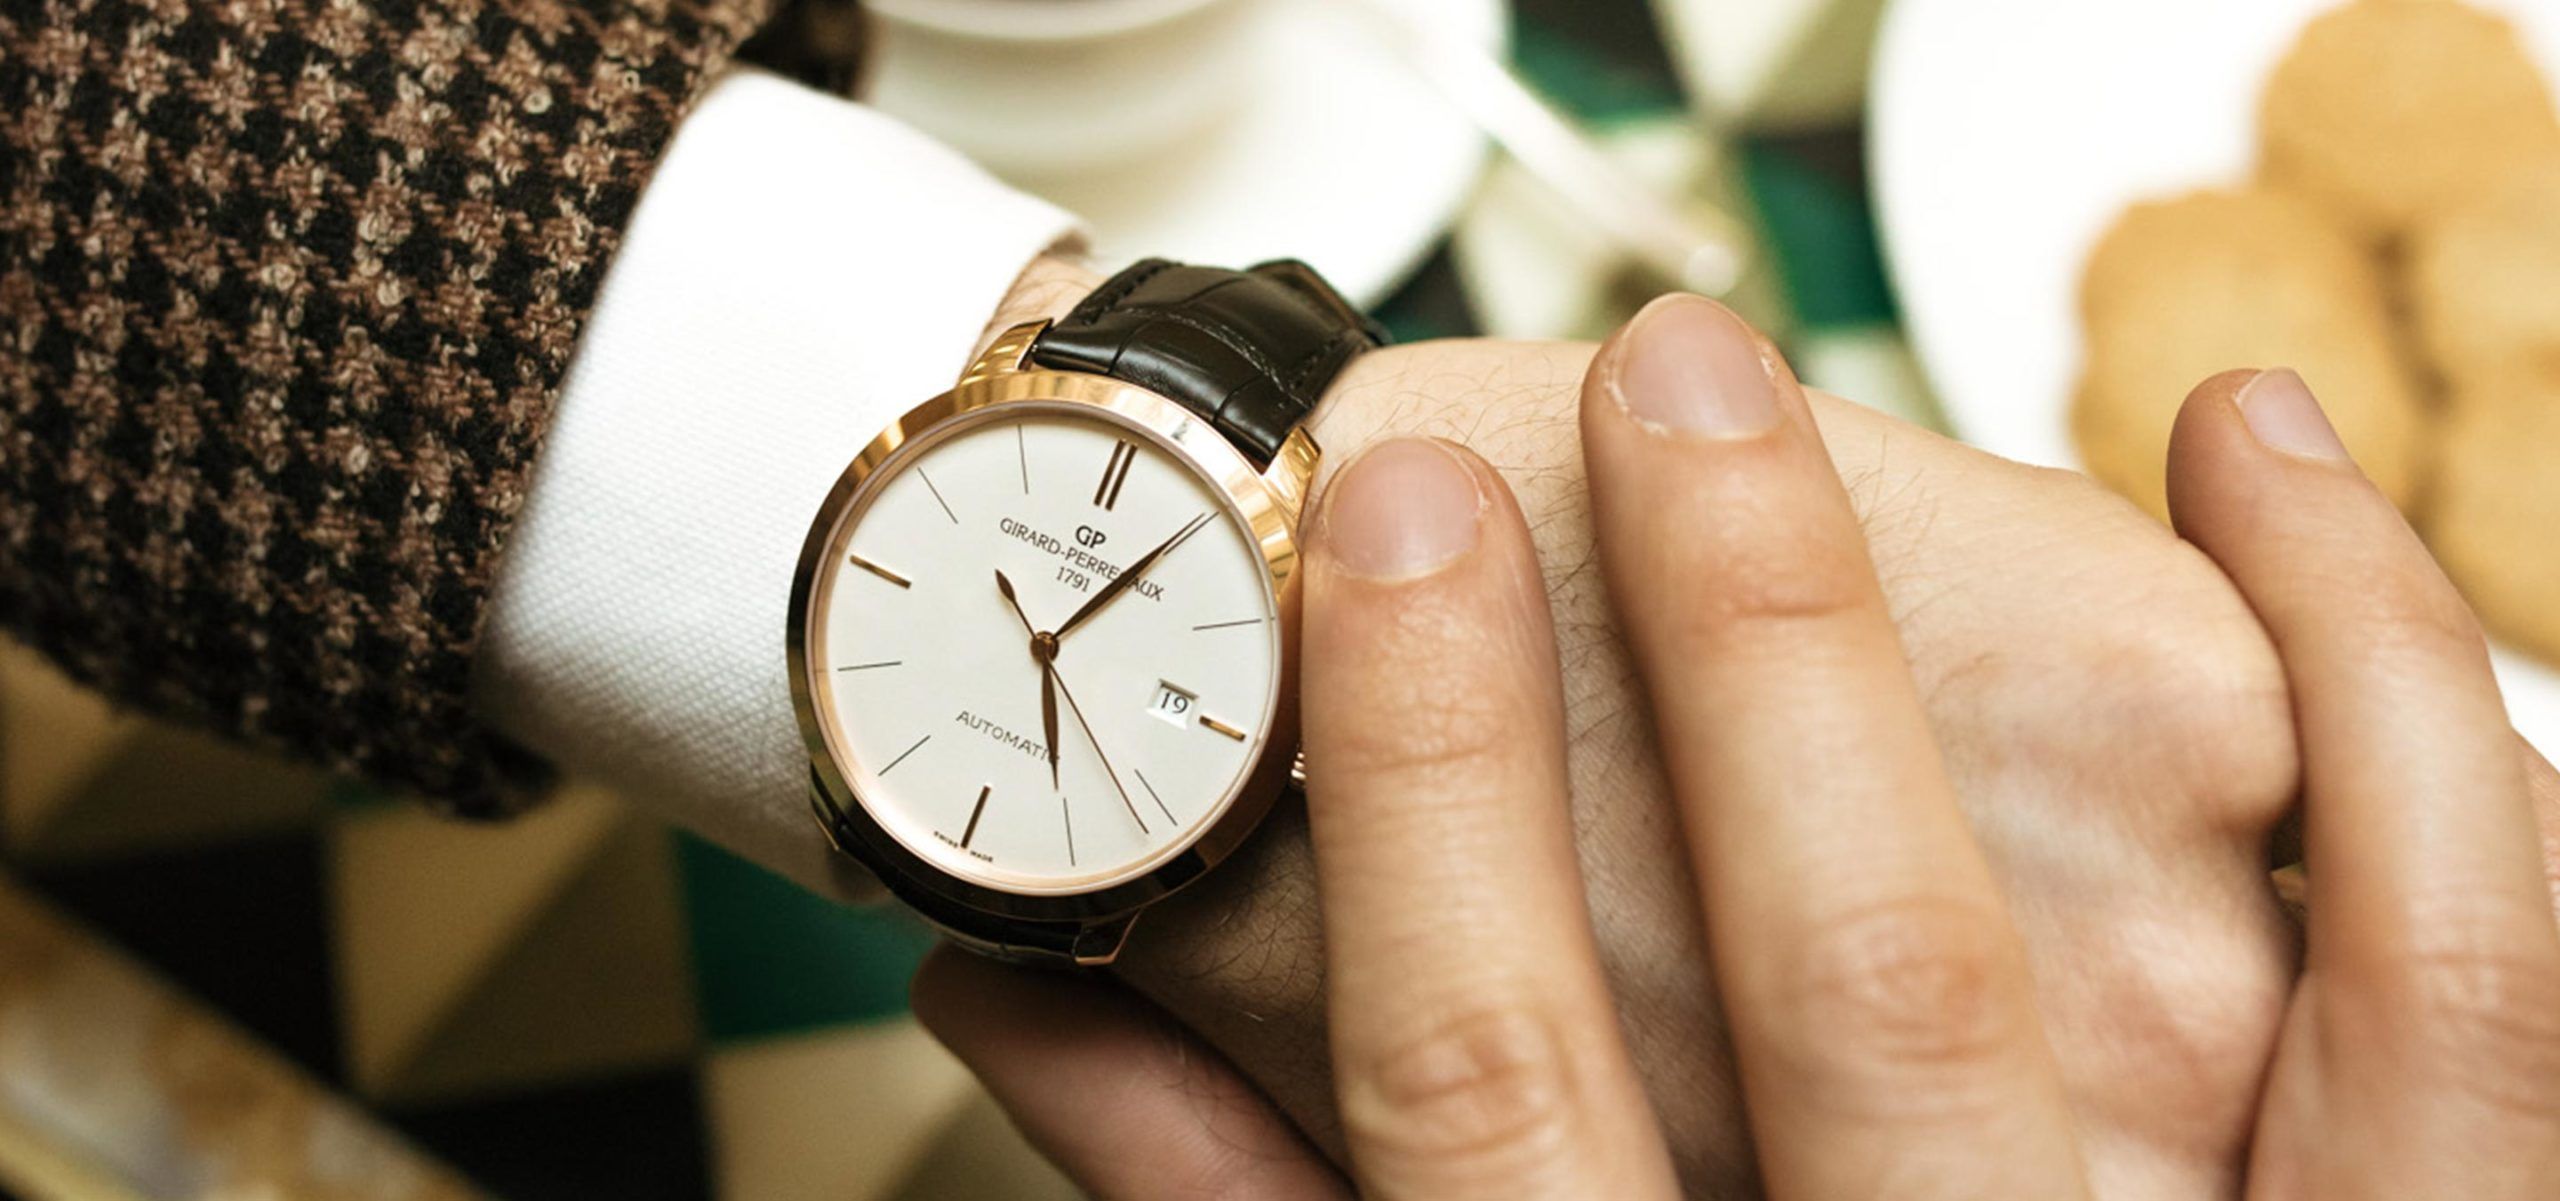 Embrace The ‘Eclectic Grandpa’ Look With These Watches